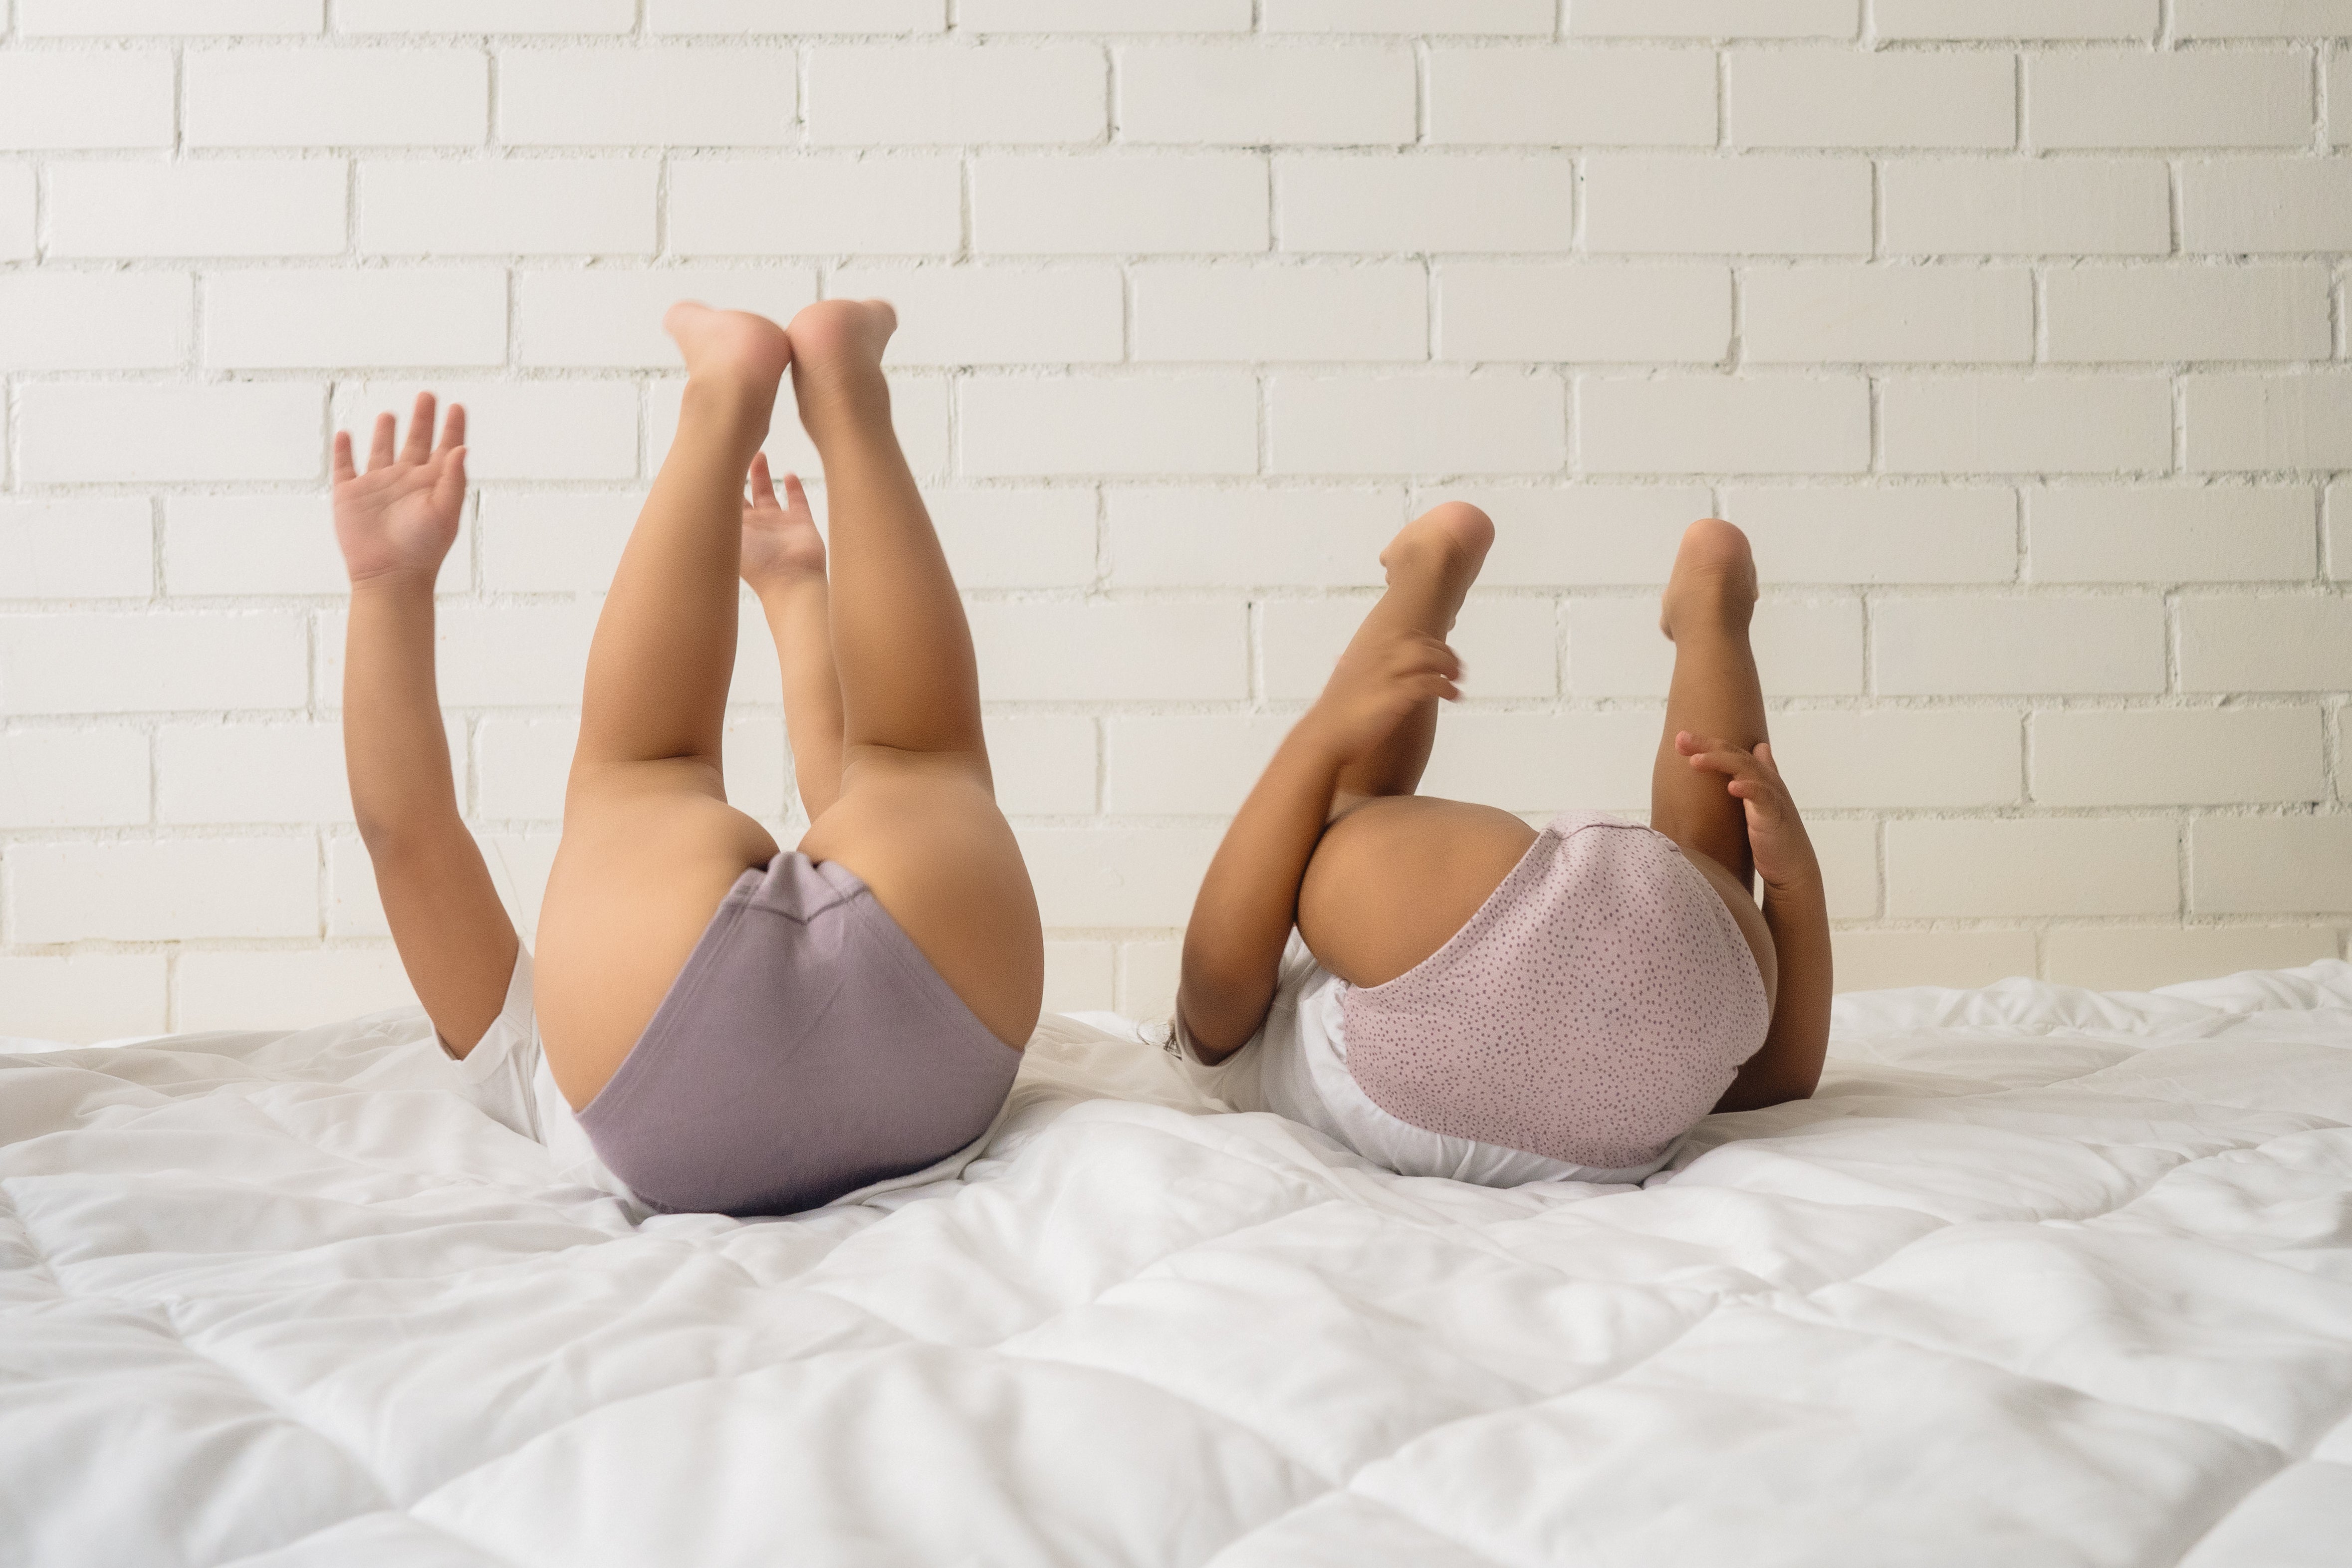 Taking Care of Your Tiny Tot’s Tushy